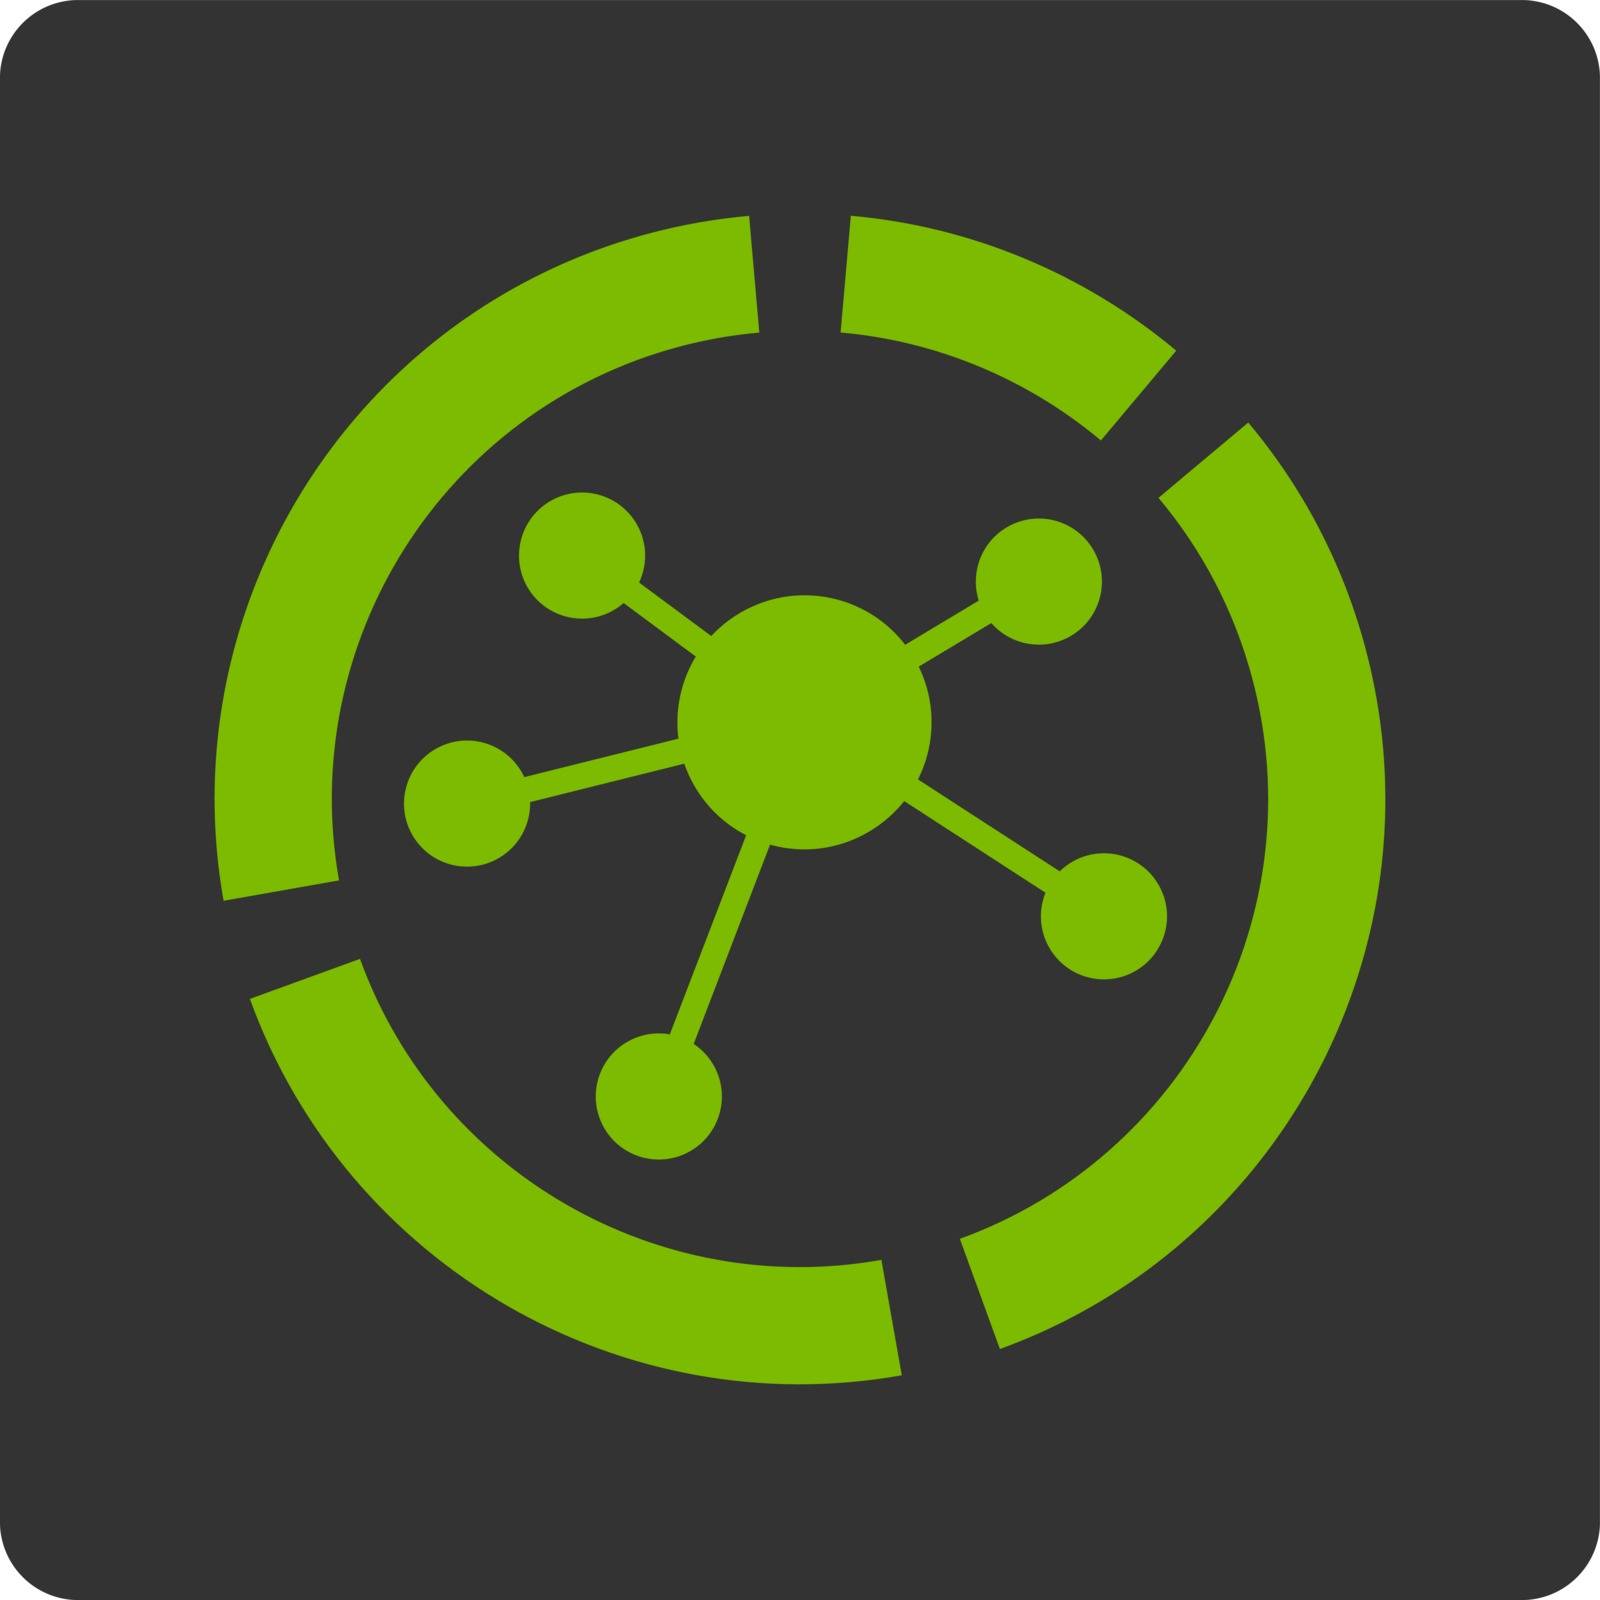 Connections diagram icon. Vector style is eco green and gray colors, flat rounded square button on a white background.